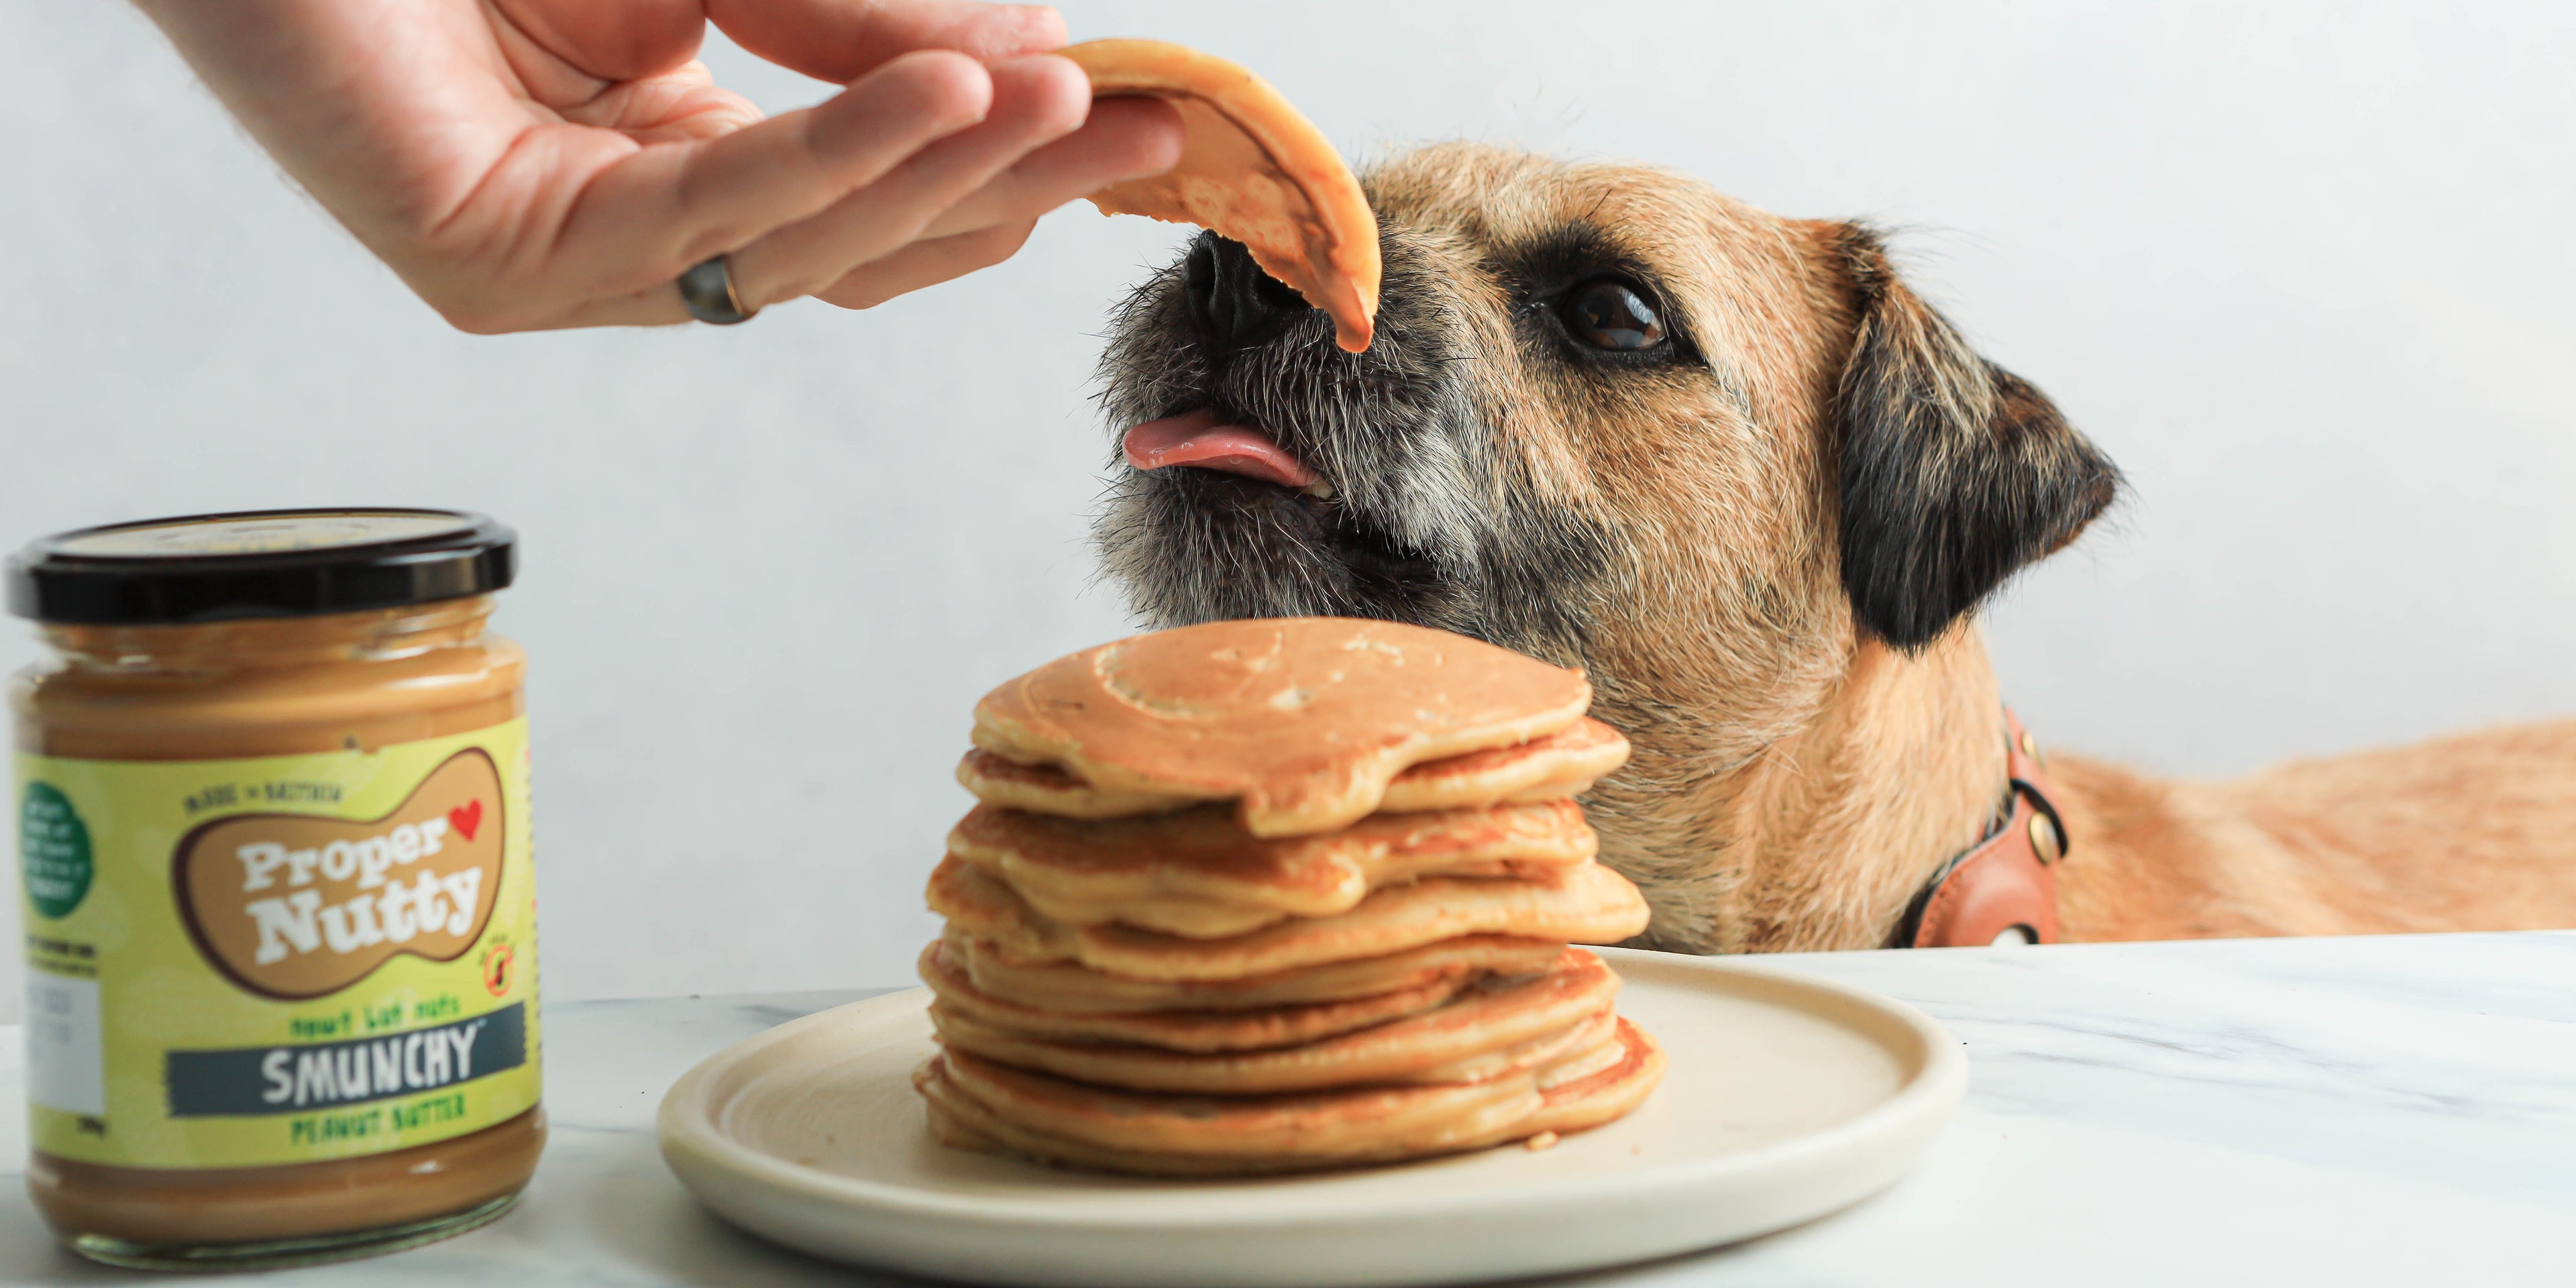 Hand holding a pancake up to a small brown dog with its tongue hanging out. There is a white plate of pancakes in the forefront of the shot next to a jar of peanut butter